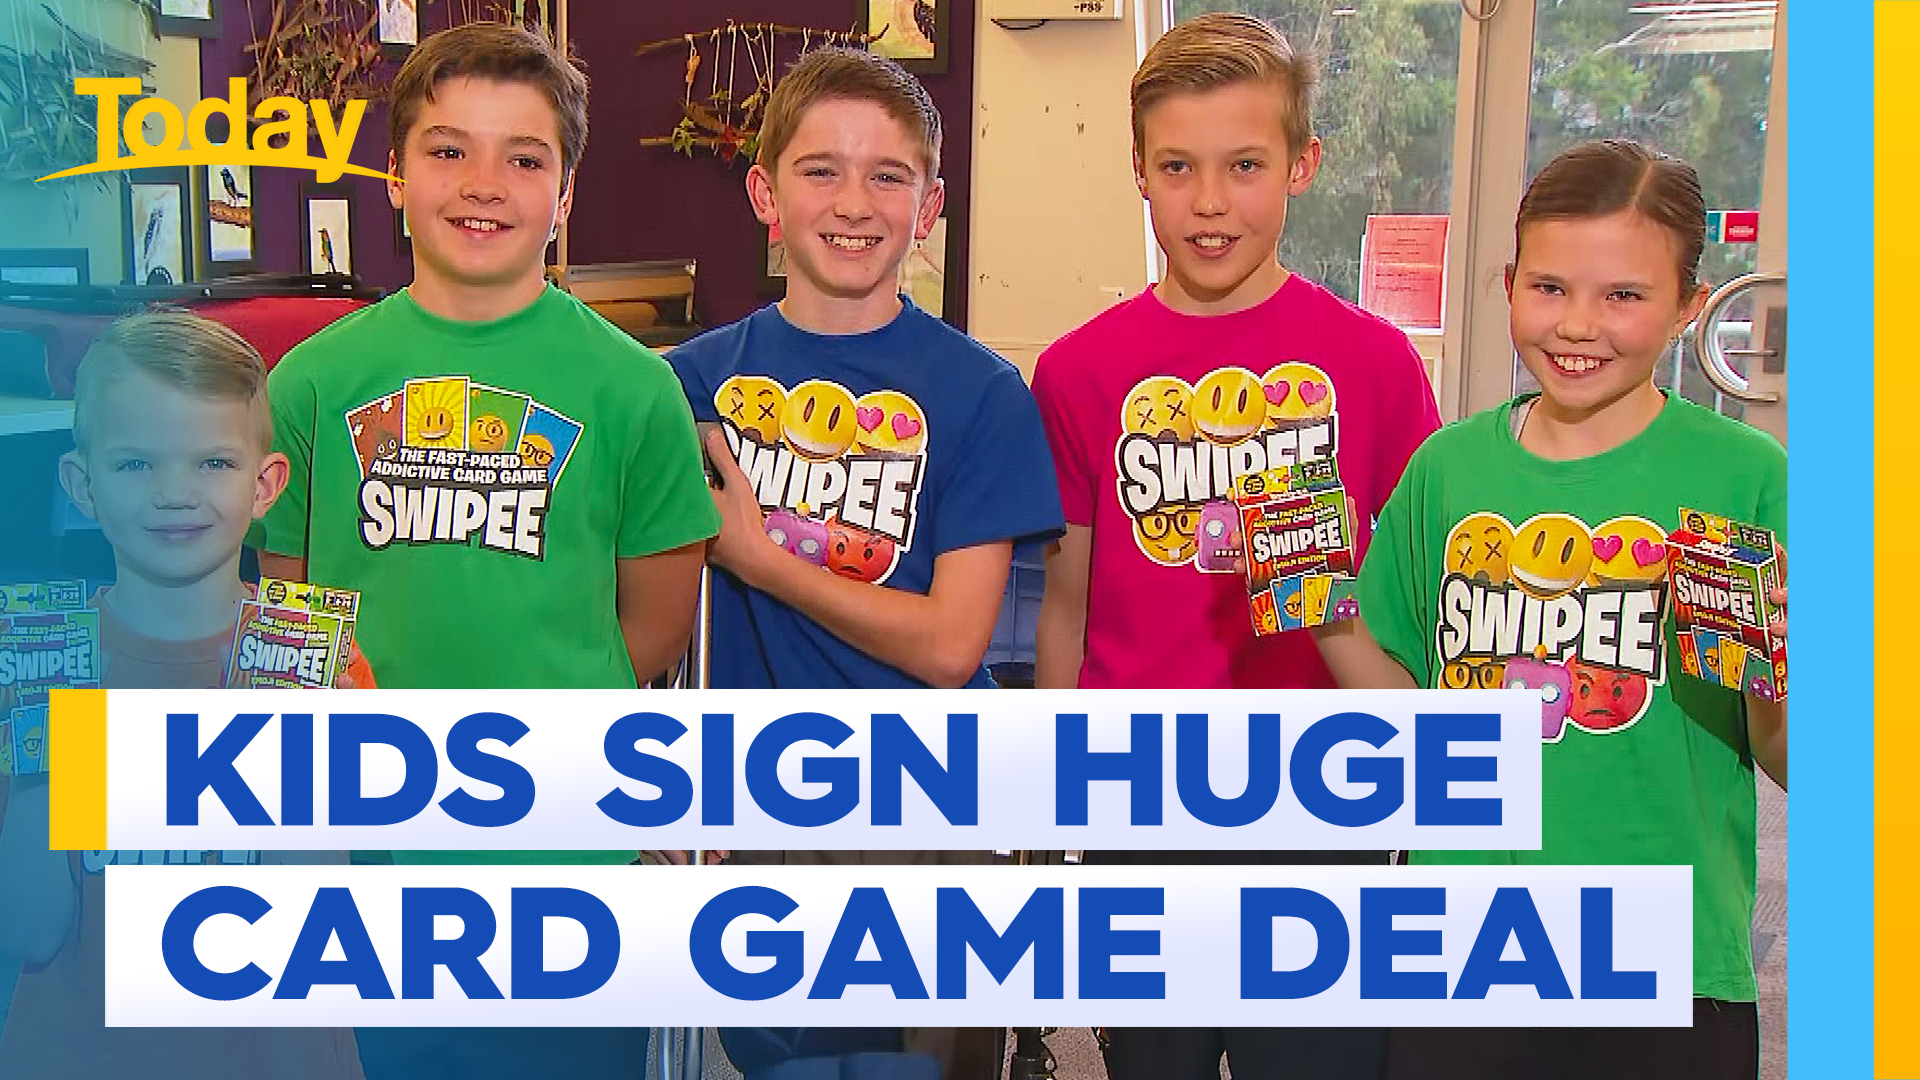 Adelaide school boys sign deal with major UK games company